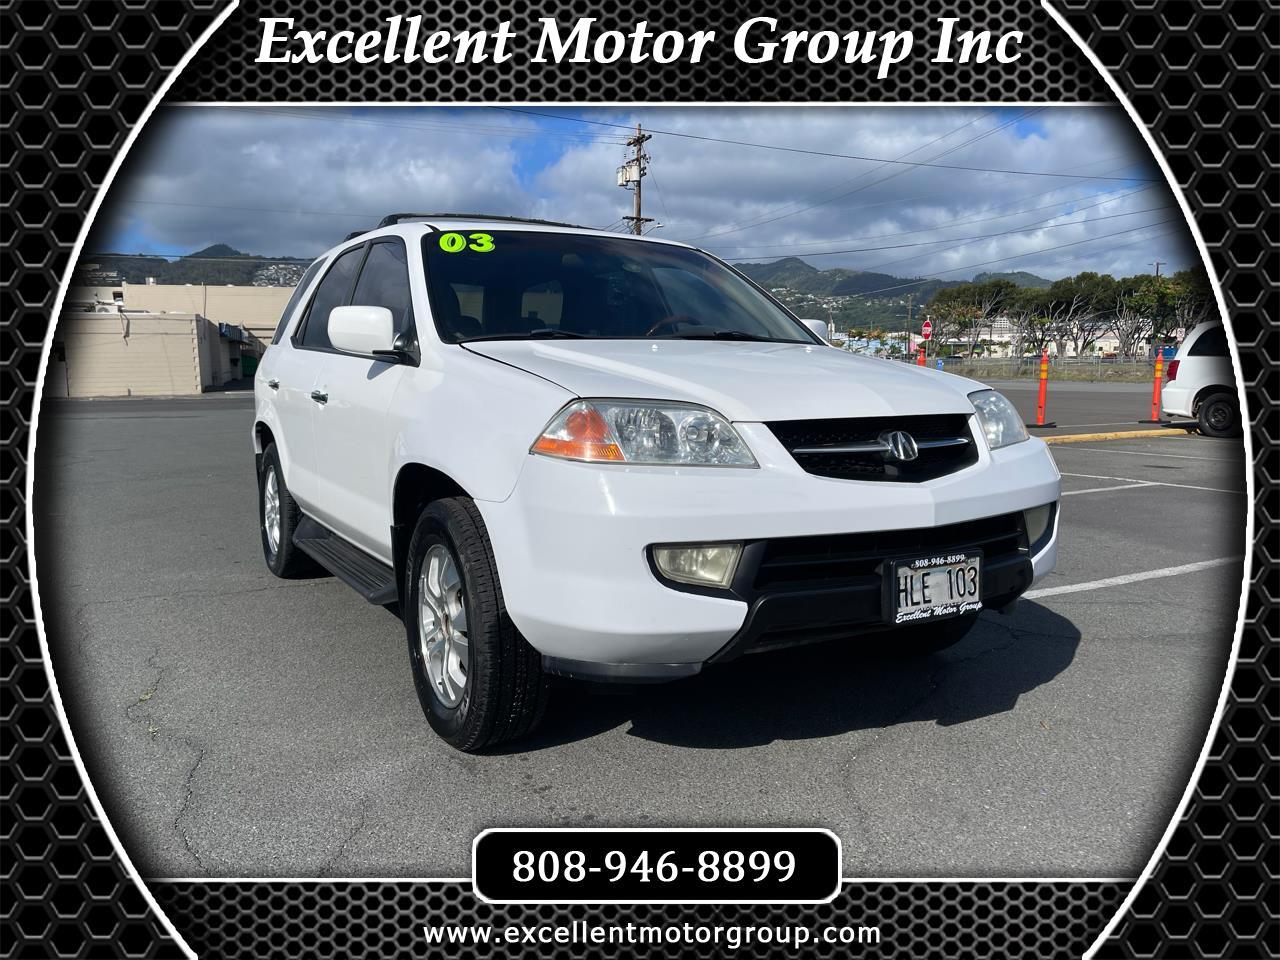 Used 2003 Acura MDX Touring for Sale in Honolulu HI 96817 Excellent Motor  Group Inc